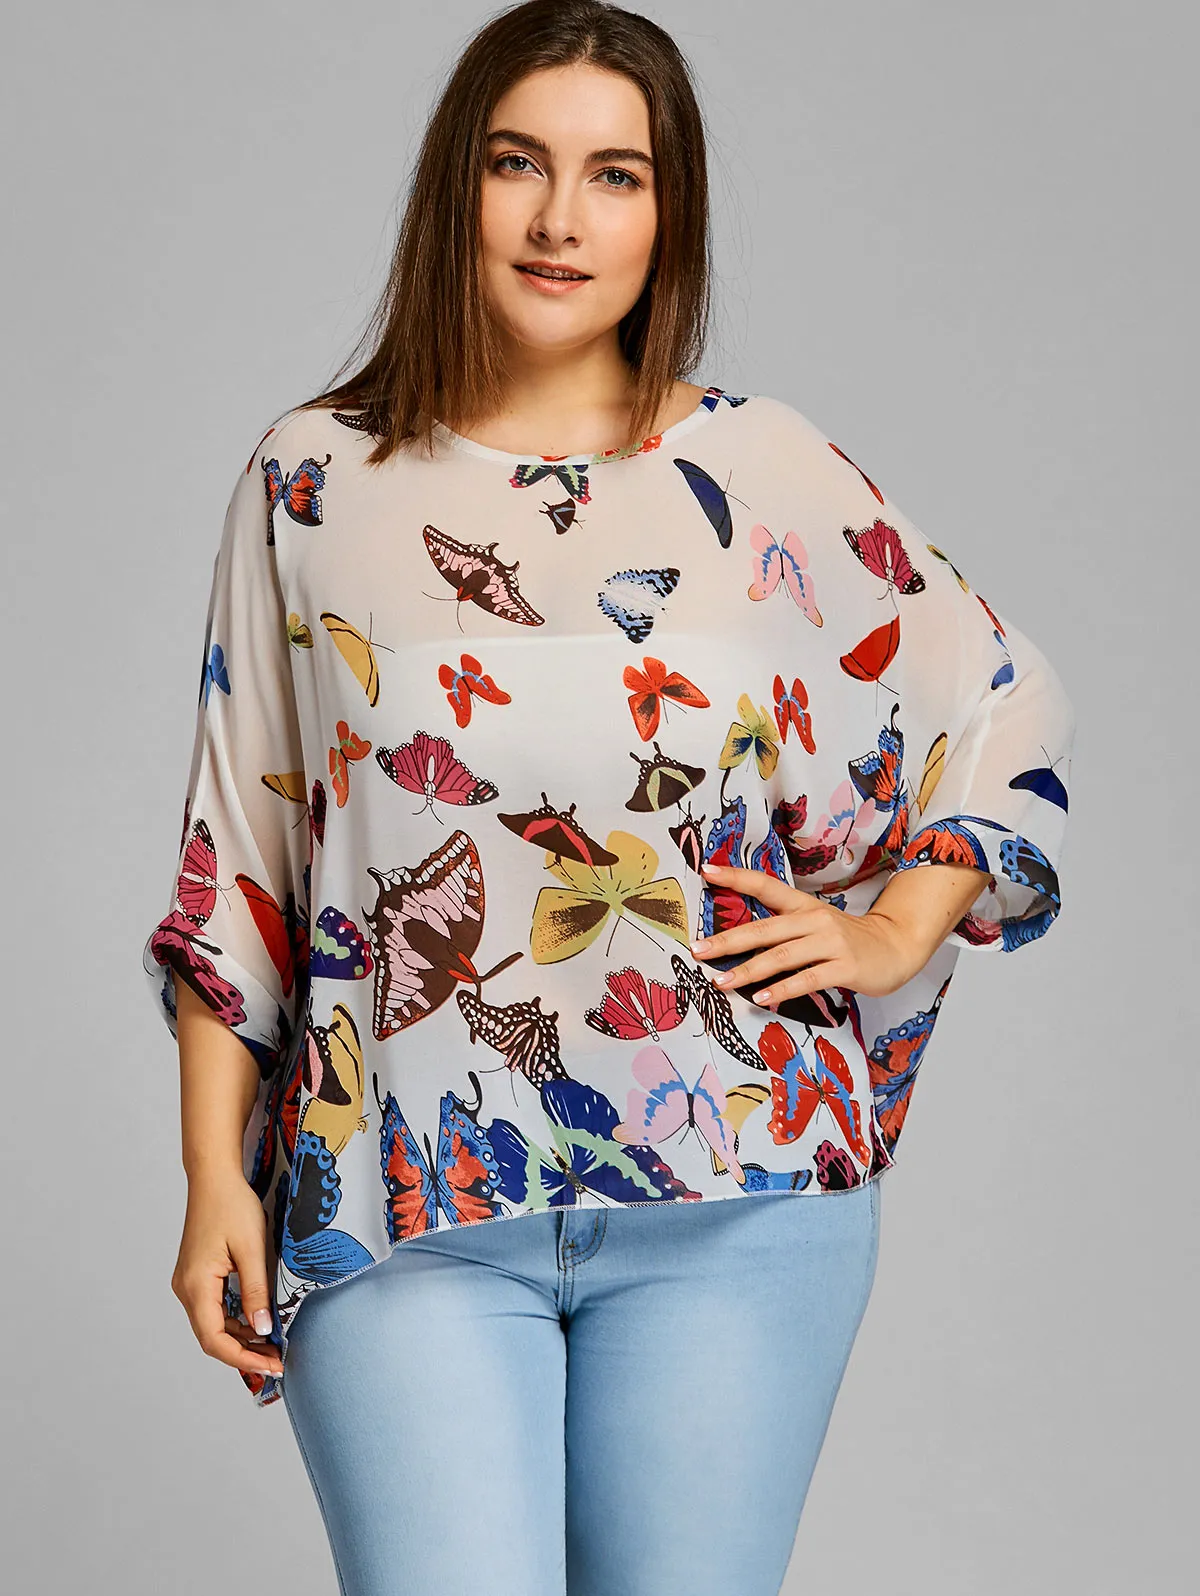 Gamiss Womens Butterfly Print Chiffon Blouse Plus Size, Casual Batwing  Sleeve, 2018 Fashion Top In 5XL From Freea, $21.55